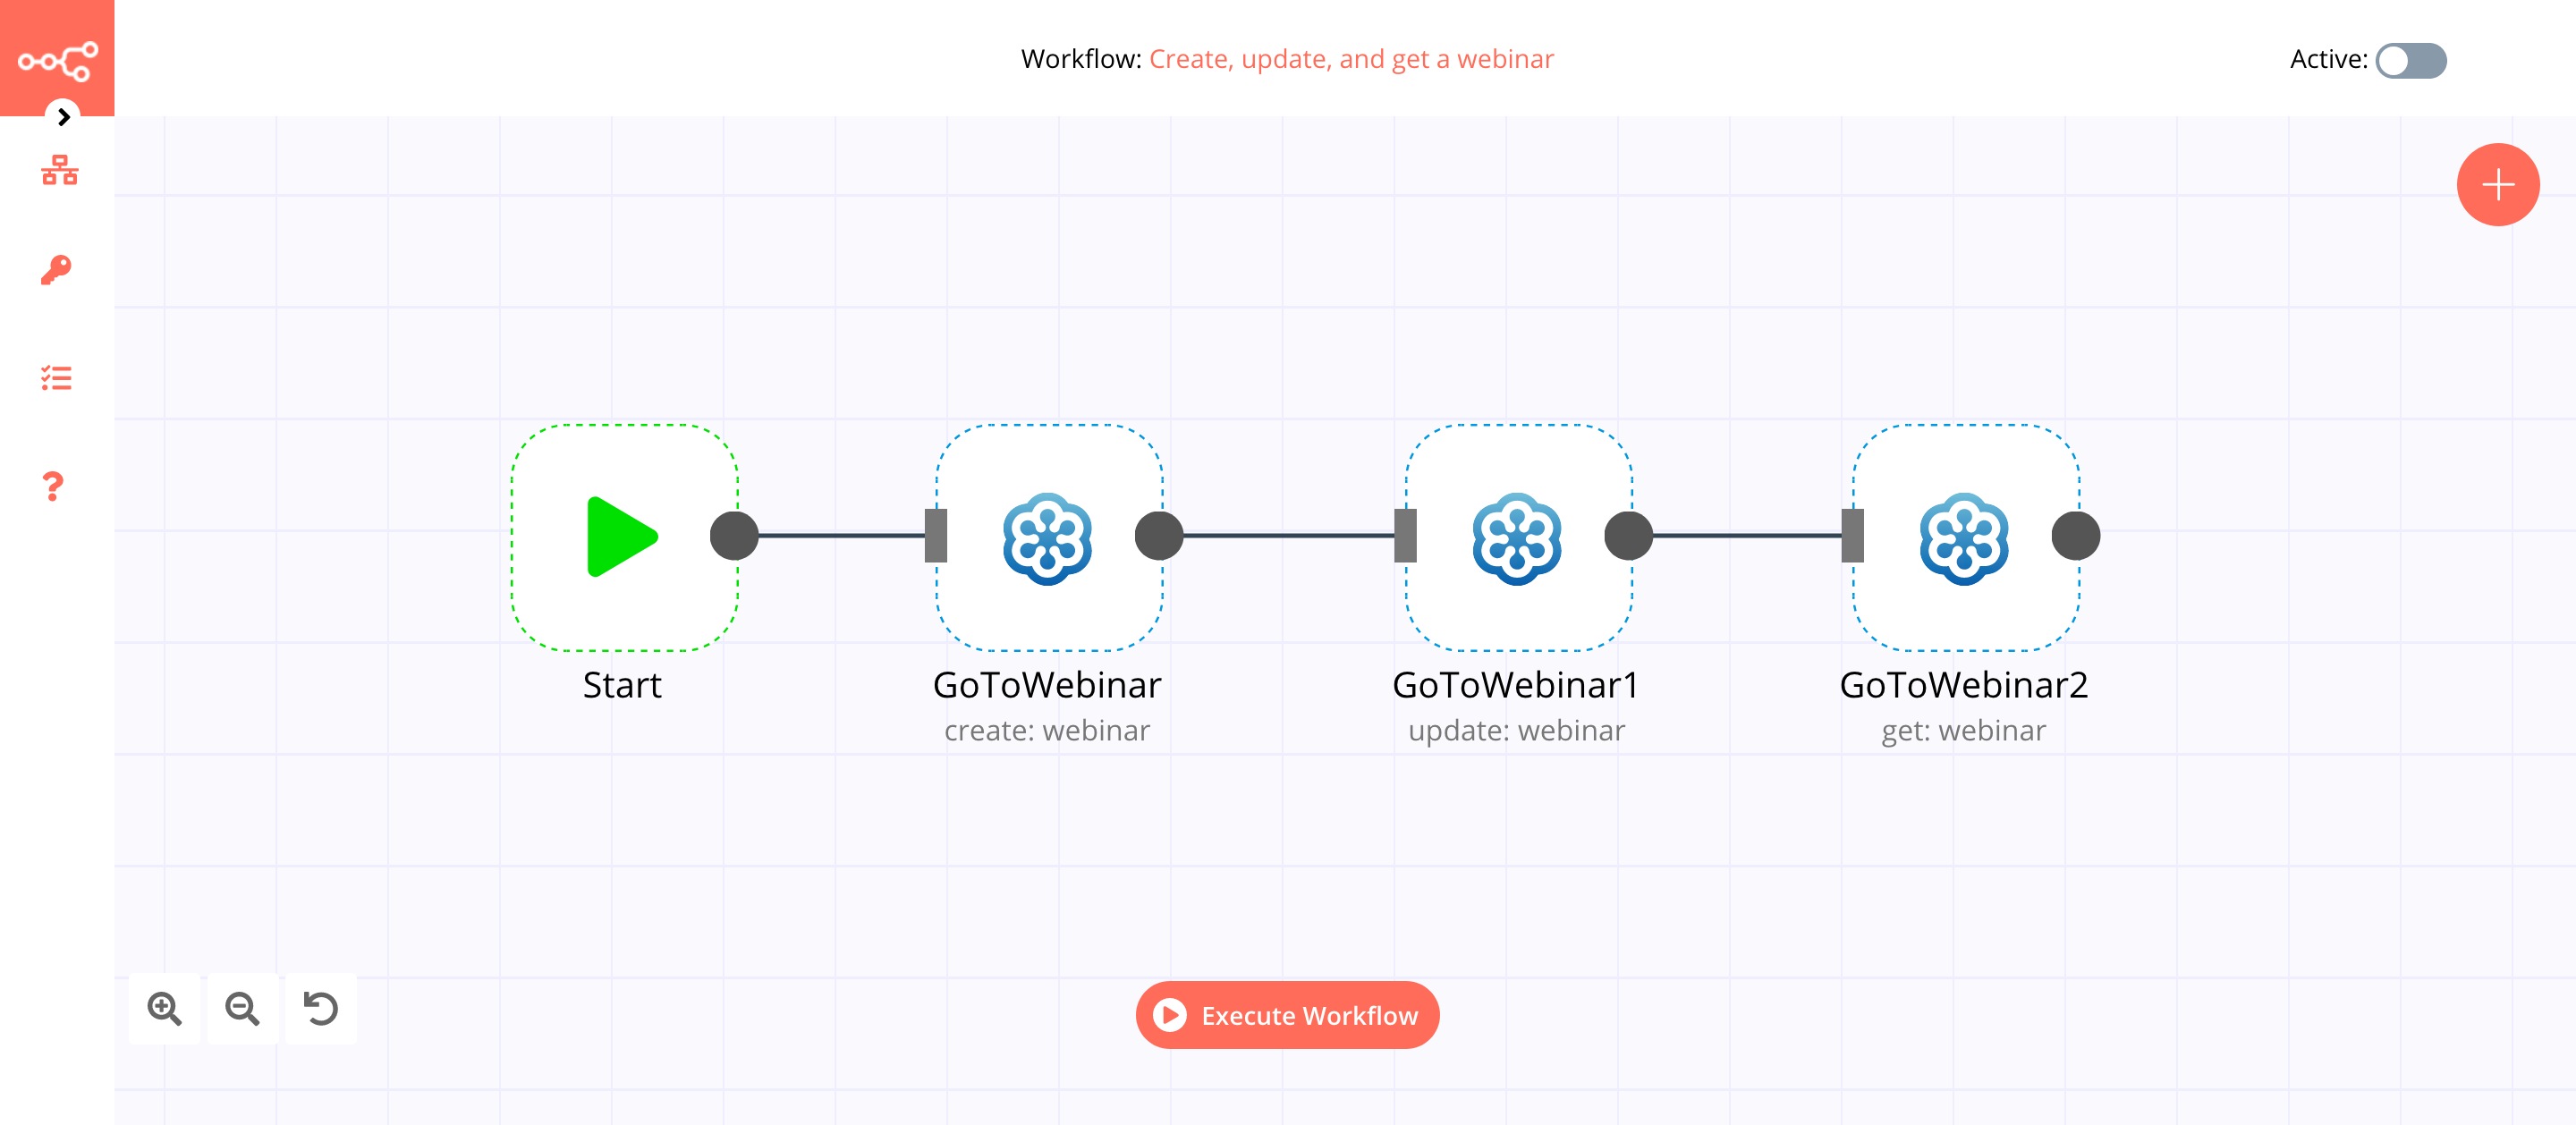 A workflow with the GoToWebinar node